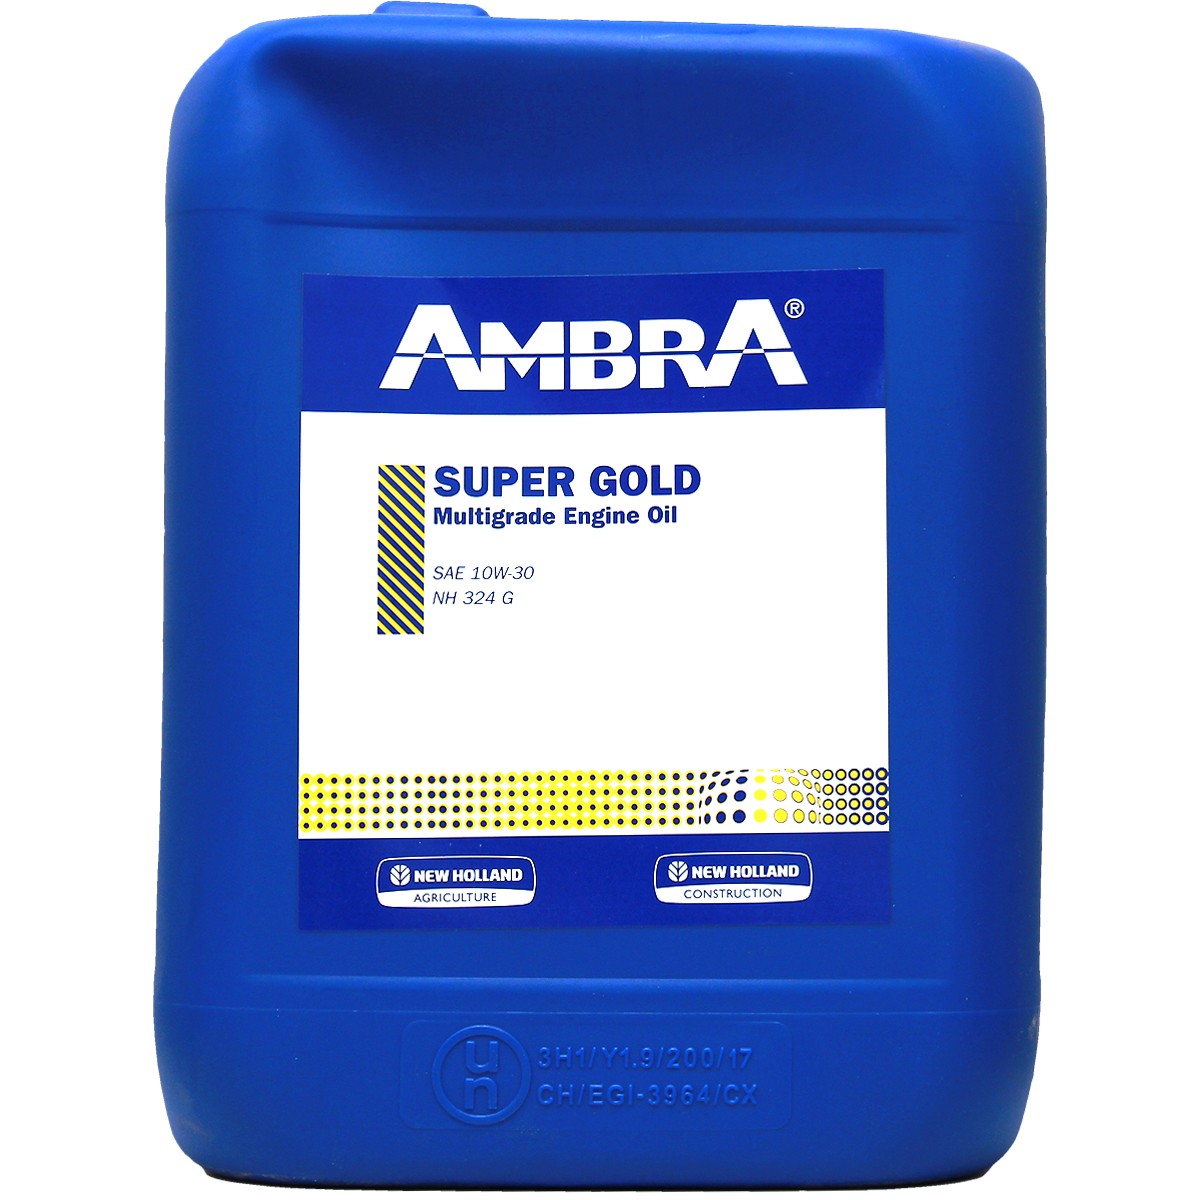 Engine oil AMBRA 10W-30, 20l, Part Synthetic Oil longlife 26891900